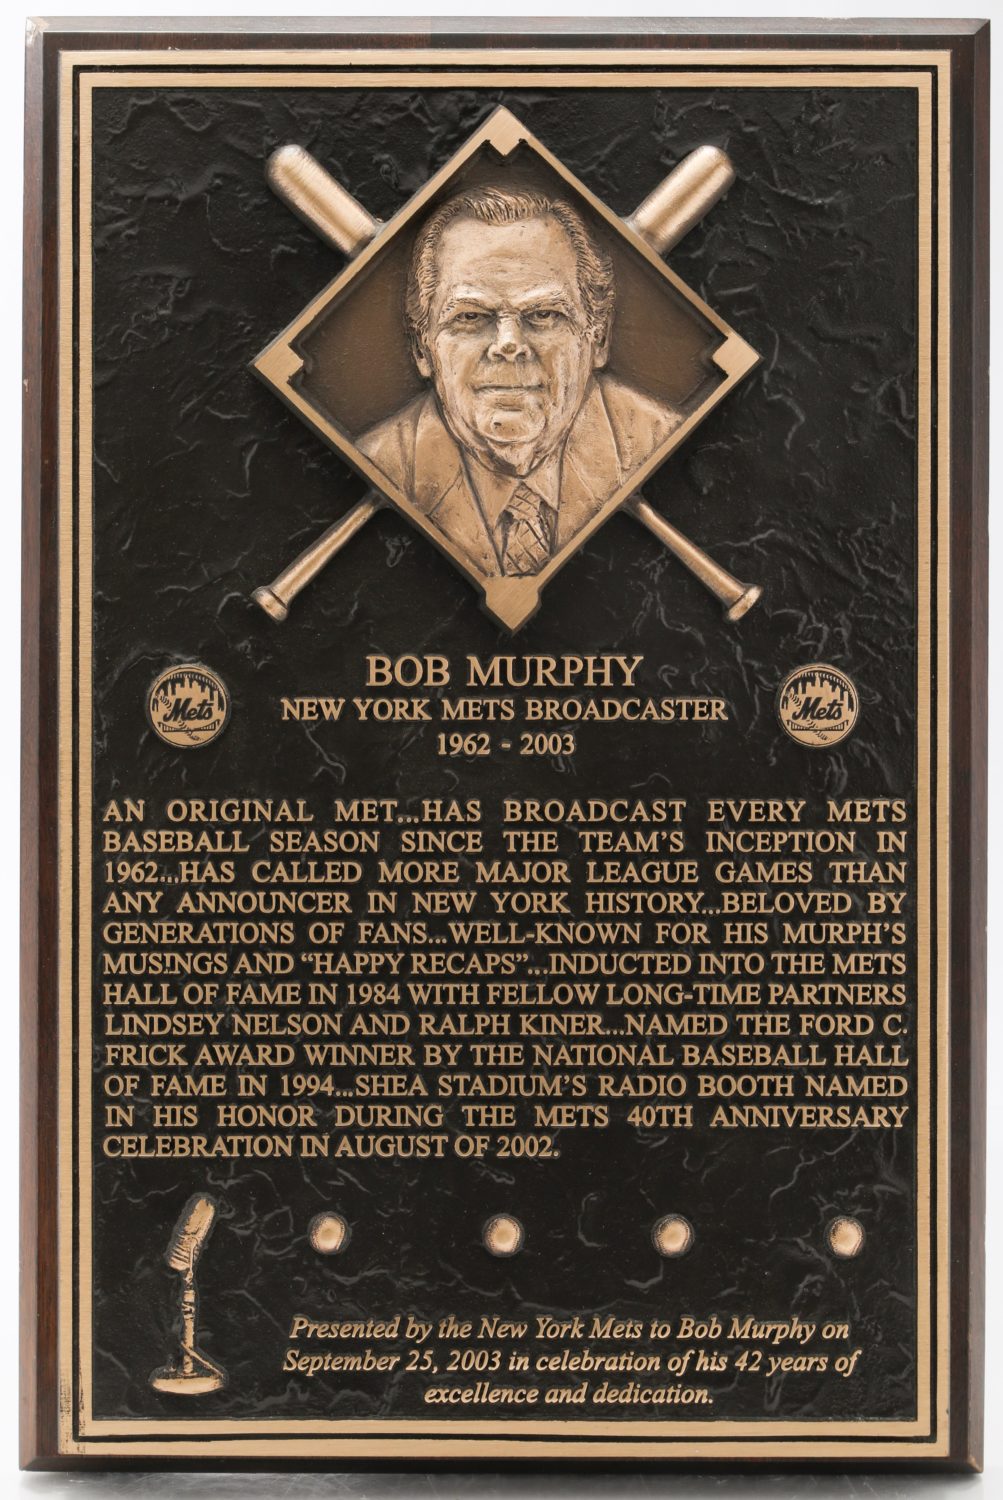 Plaque Honoring Bob Murphy for 42 Years of Broadcasting